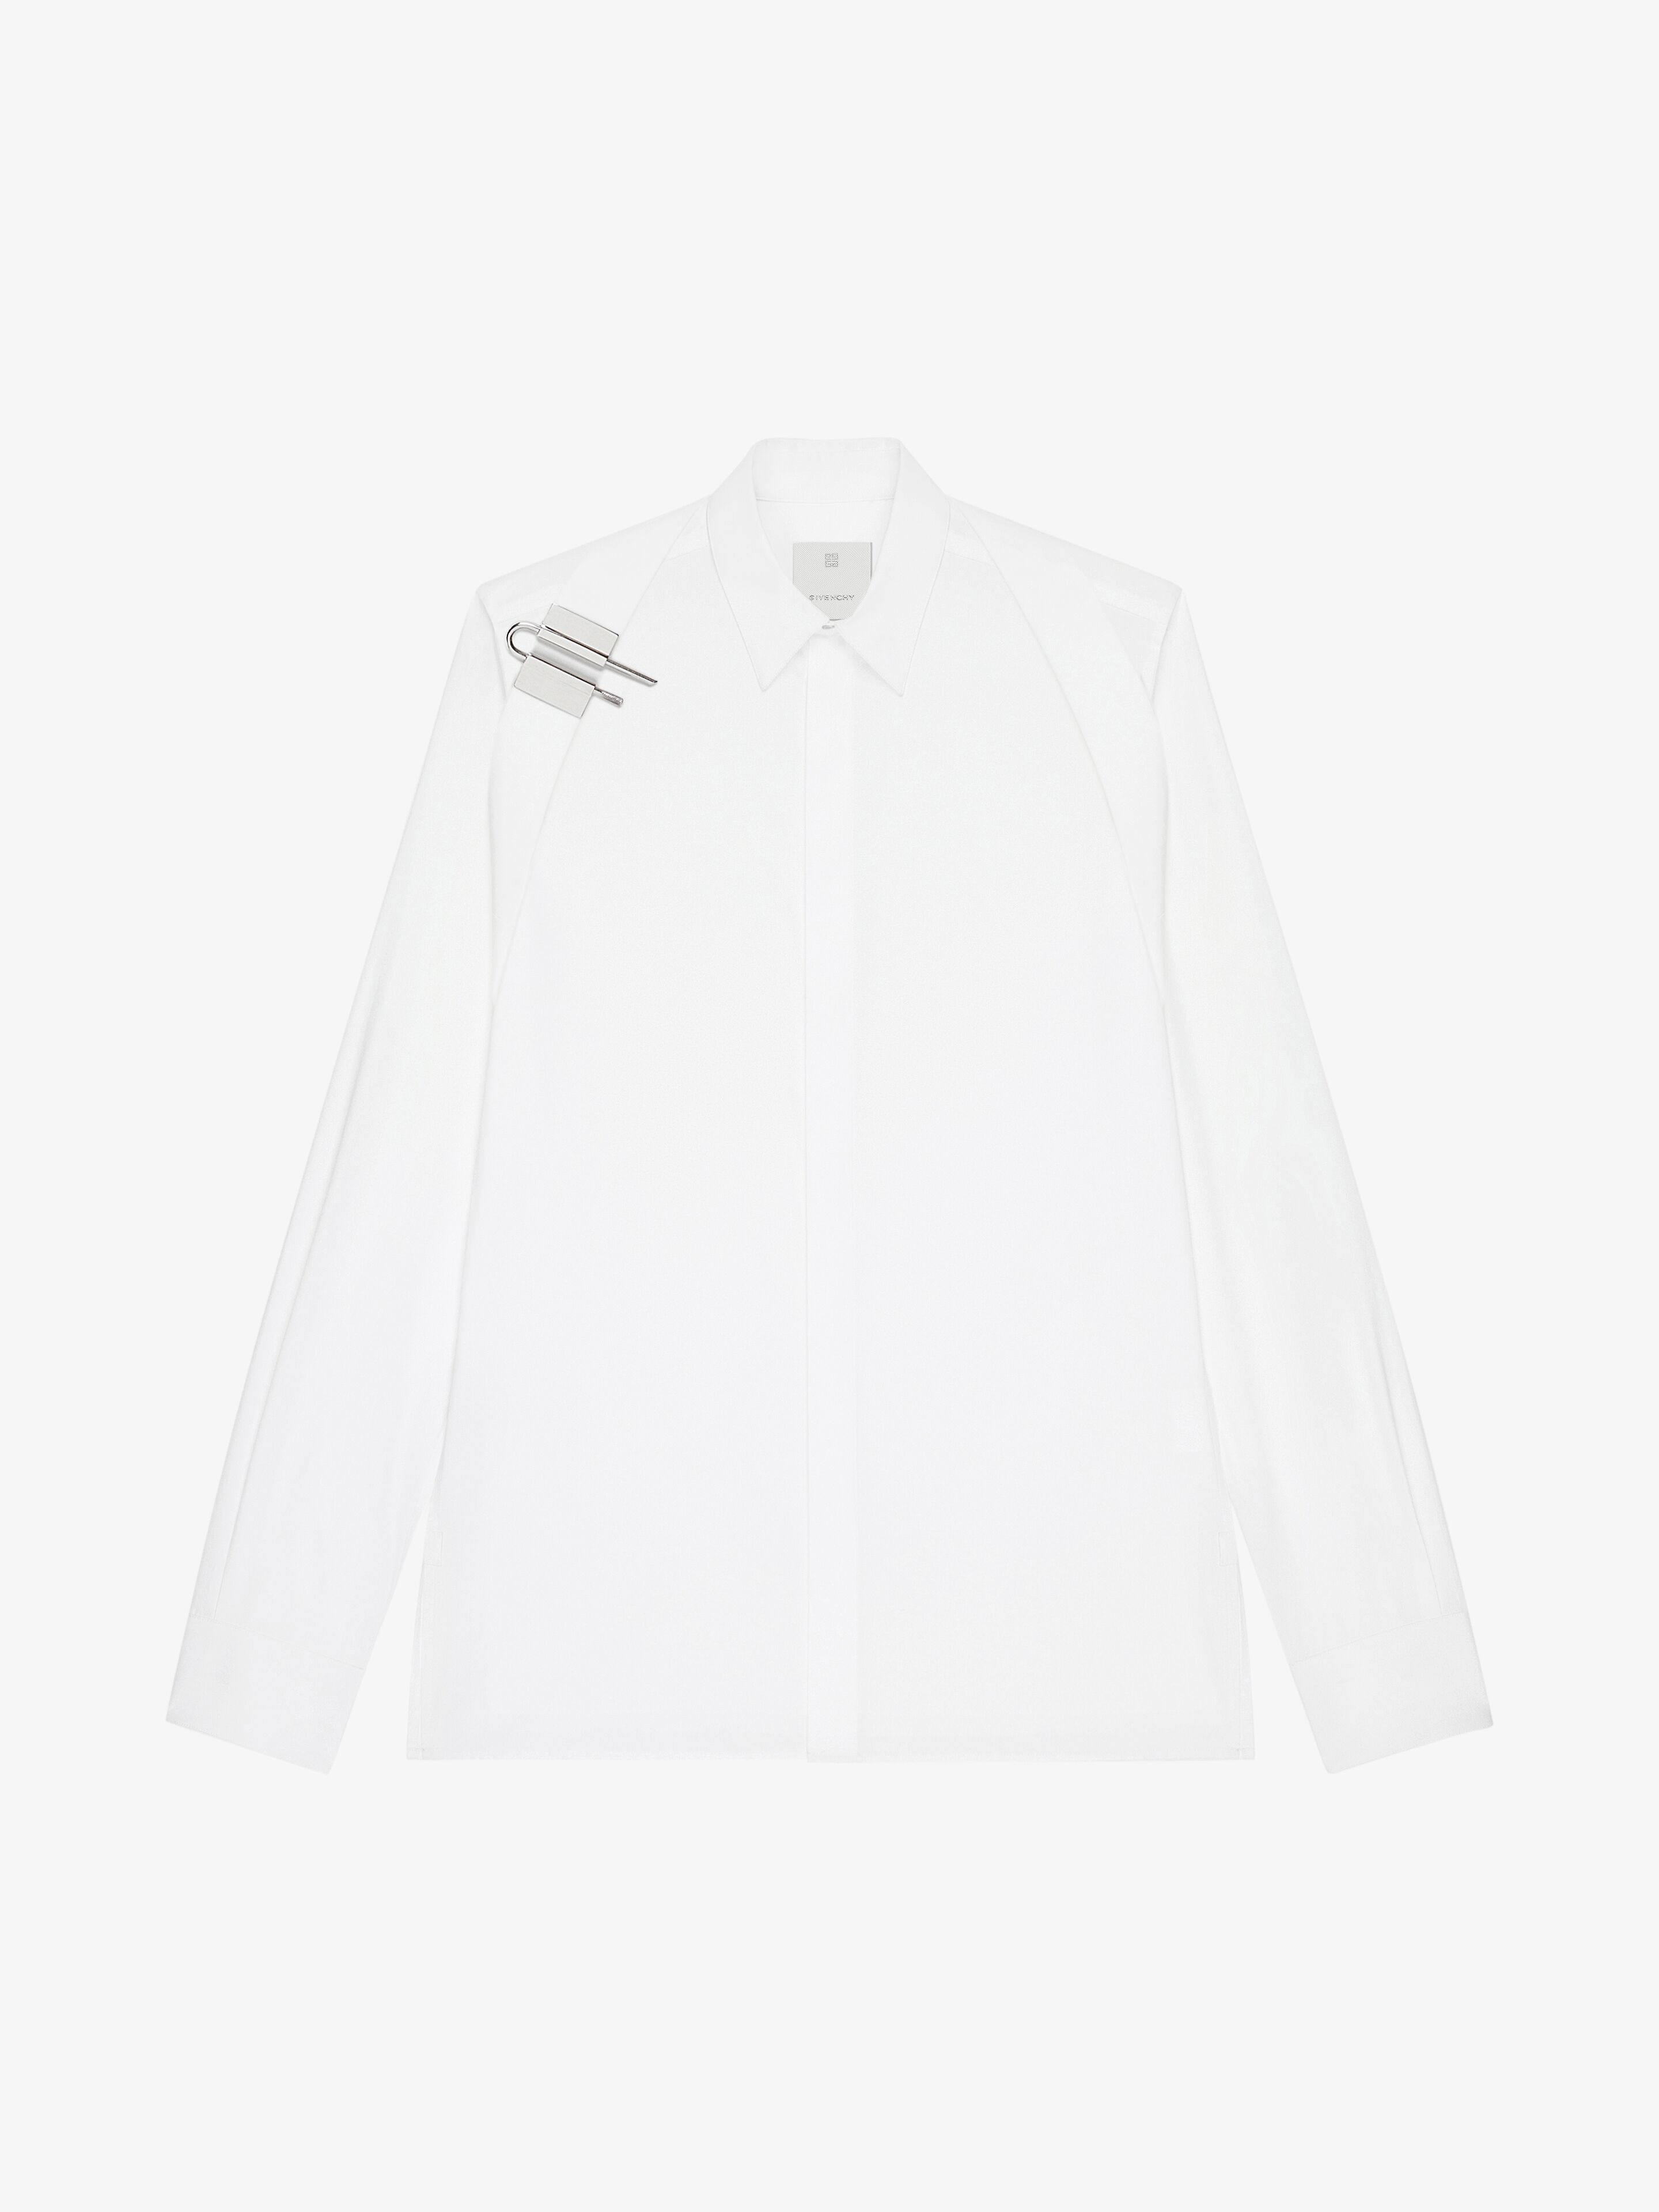 Givenchy Men's Shirt In Poplin With U-lock Harness In White